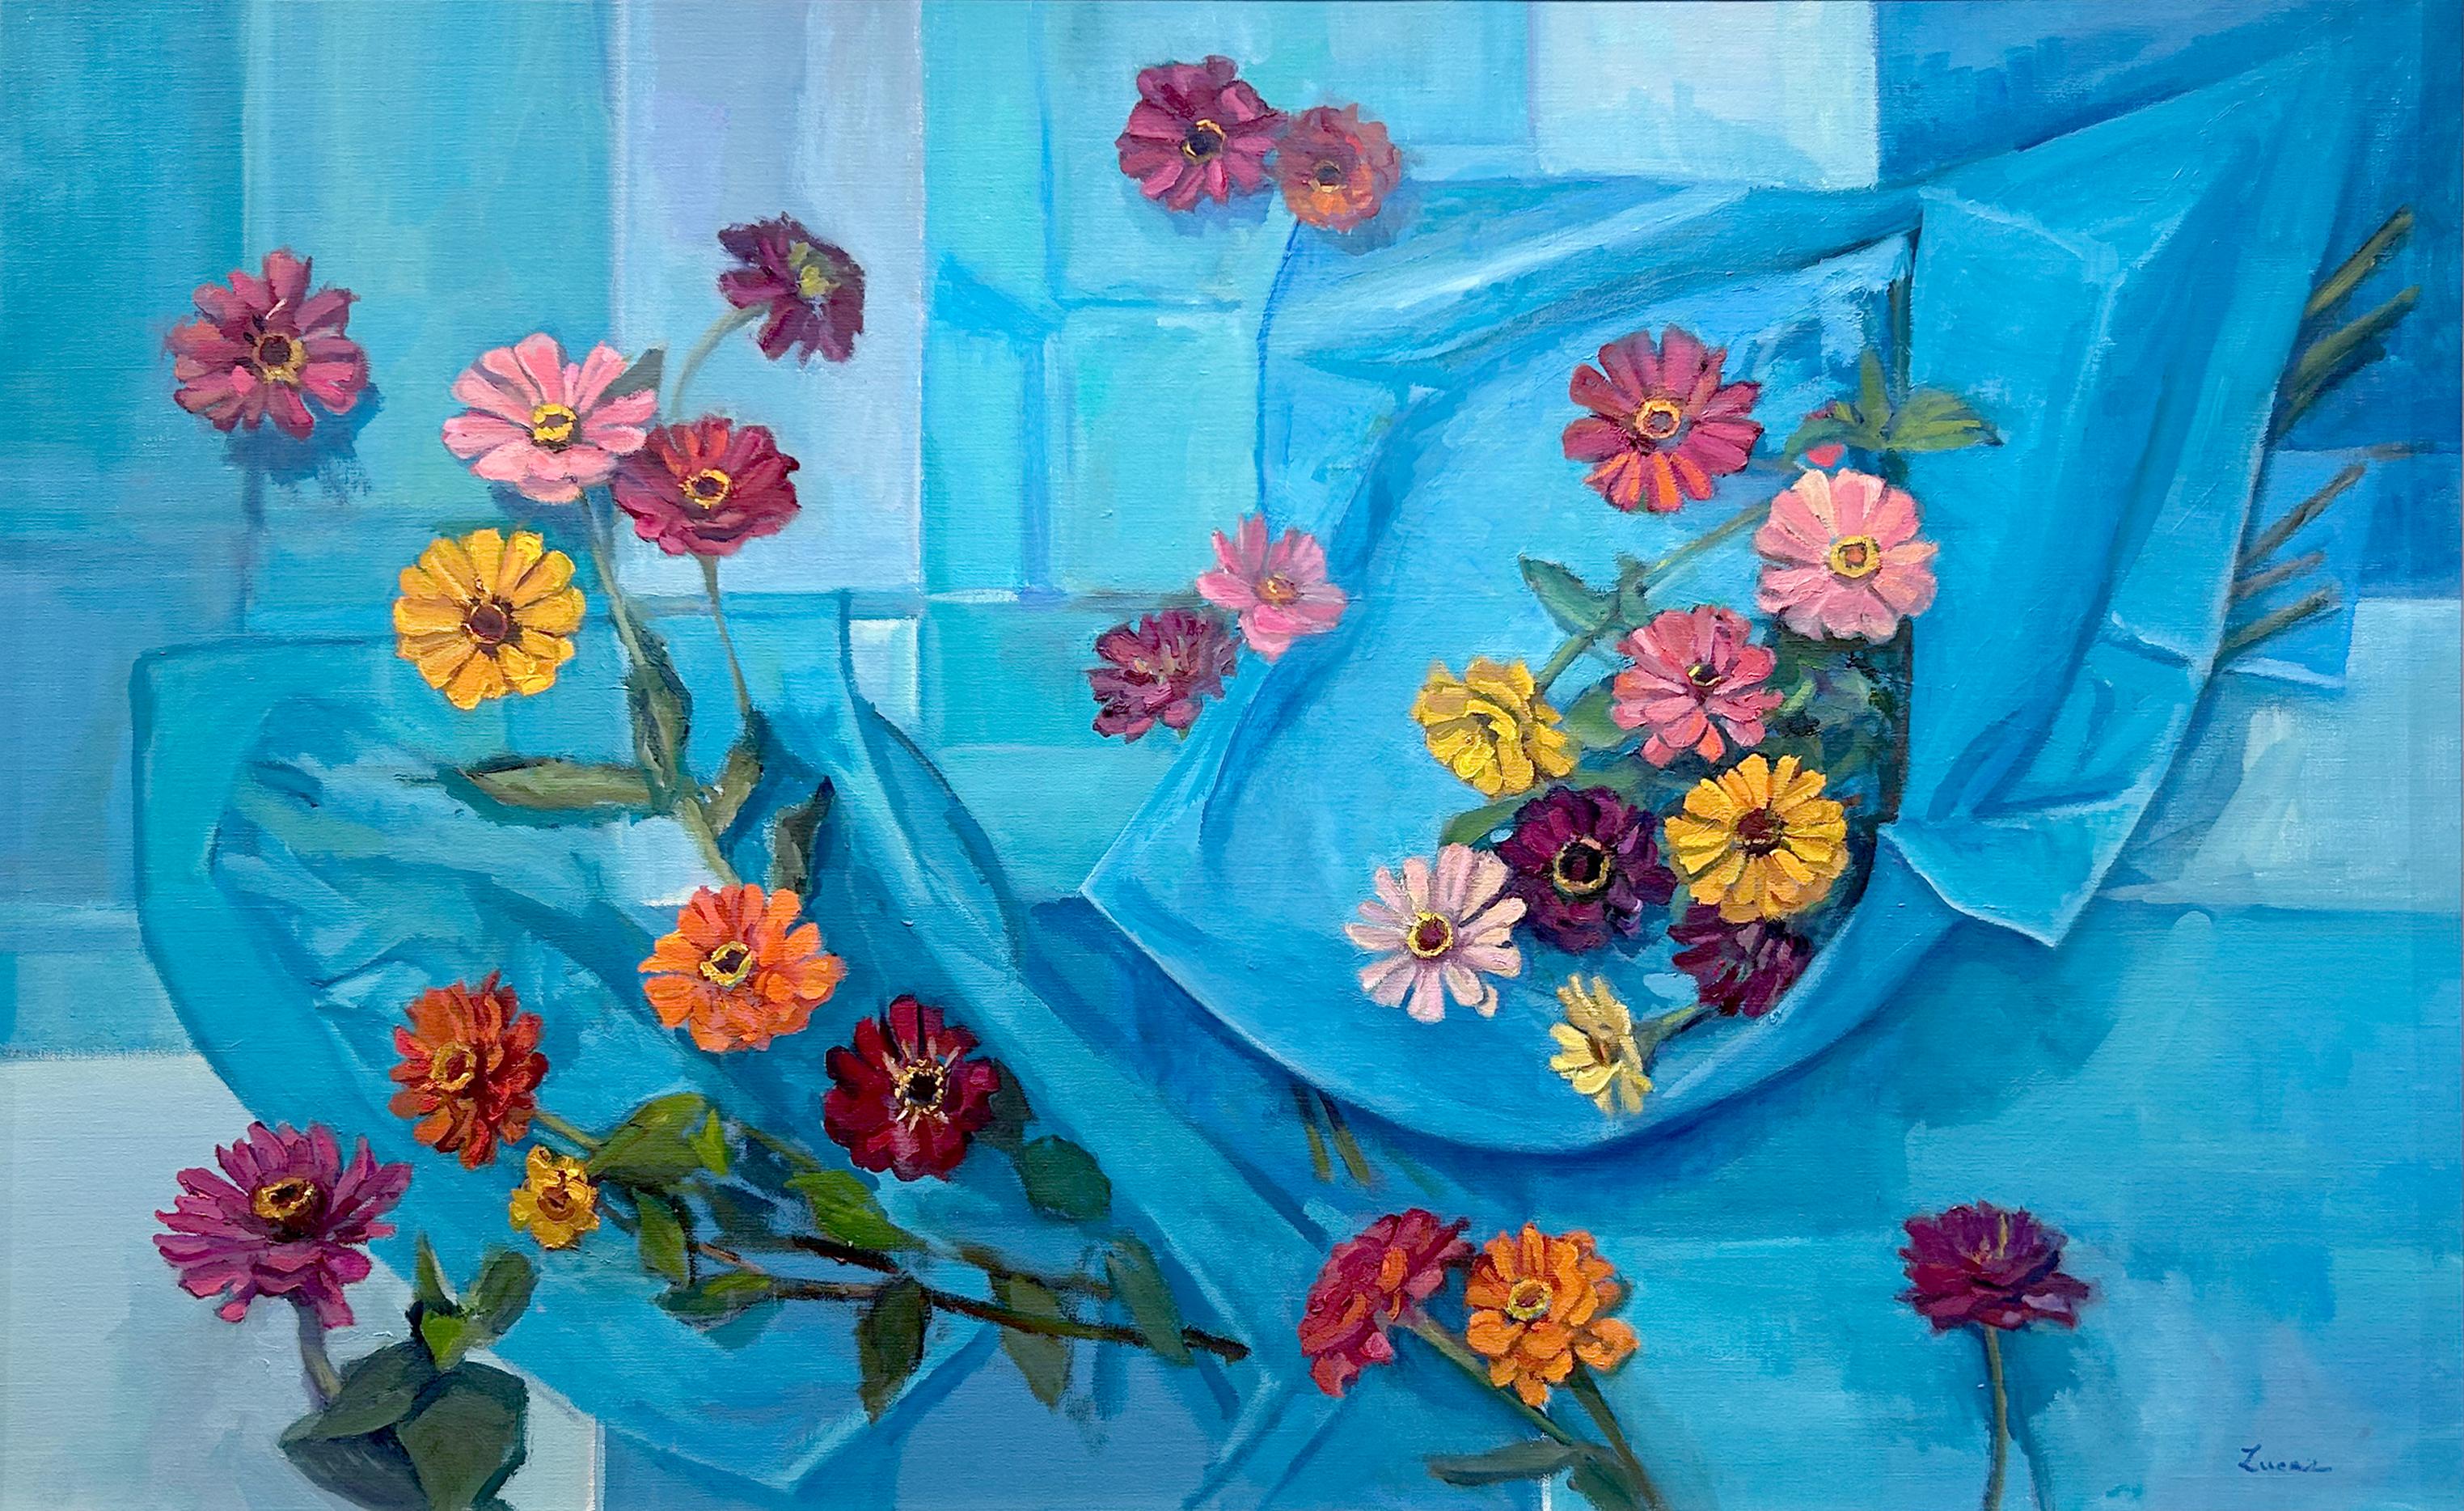 This bright and colorful floral painting, "Out of the Blue", is a 30x48 still life oil painting on canvas by Maryann Lucas.  Featured is a top down angle of a blue background layered with tissue paper and a colorful arrangement of zinnias in pink,